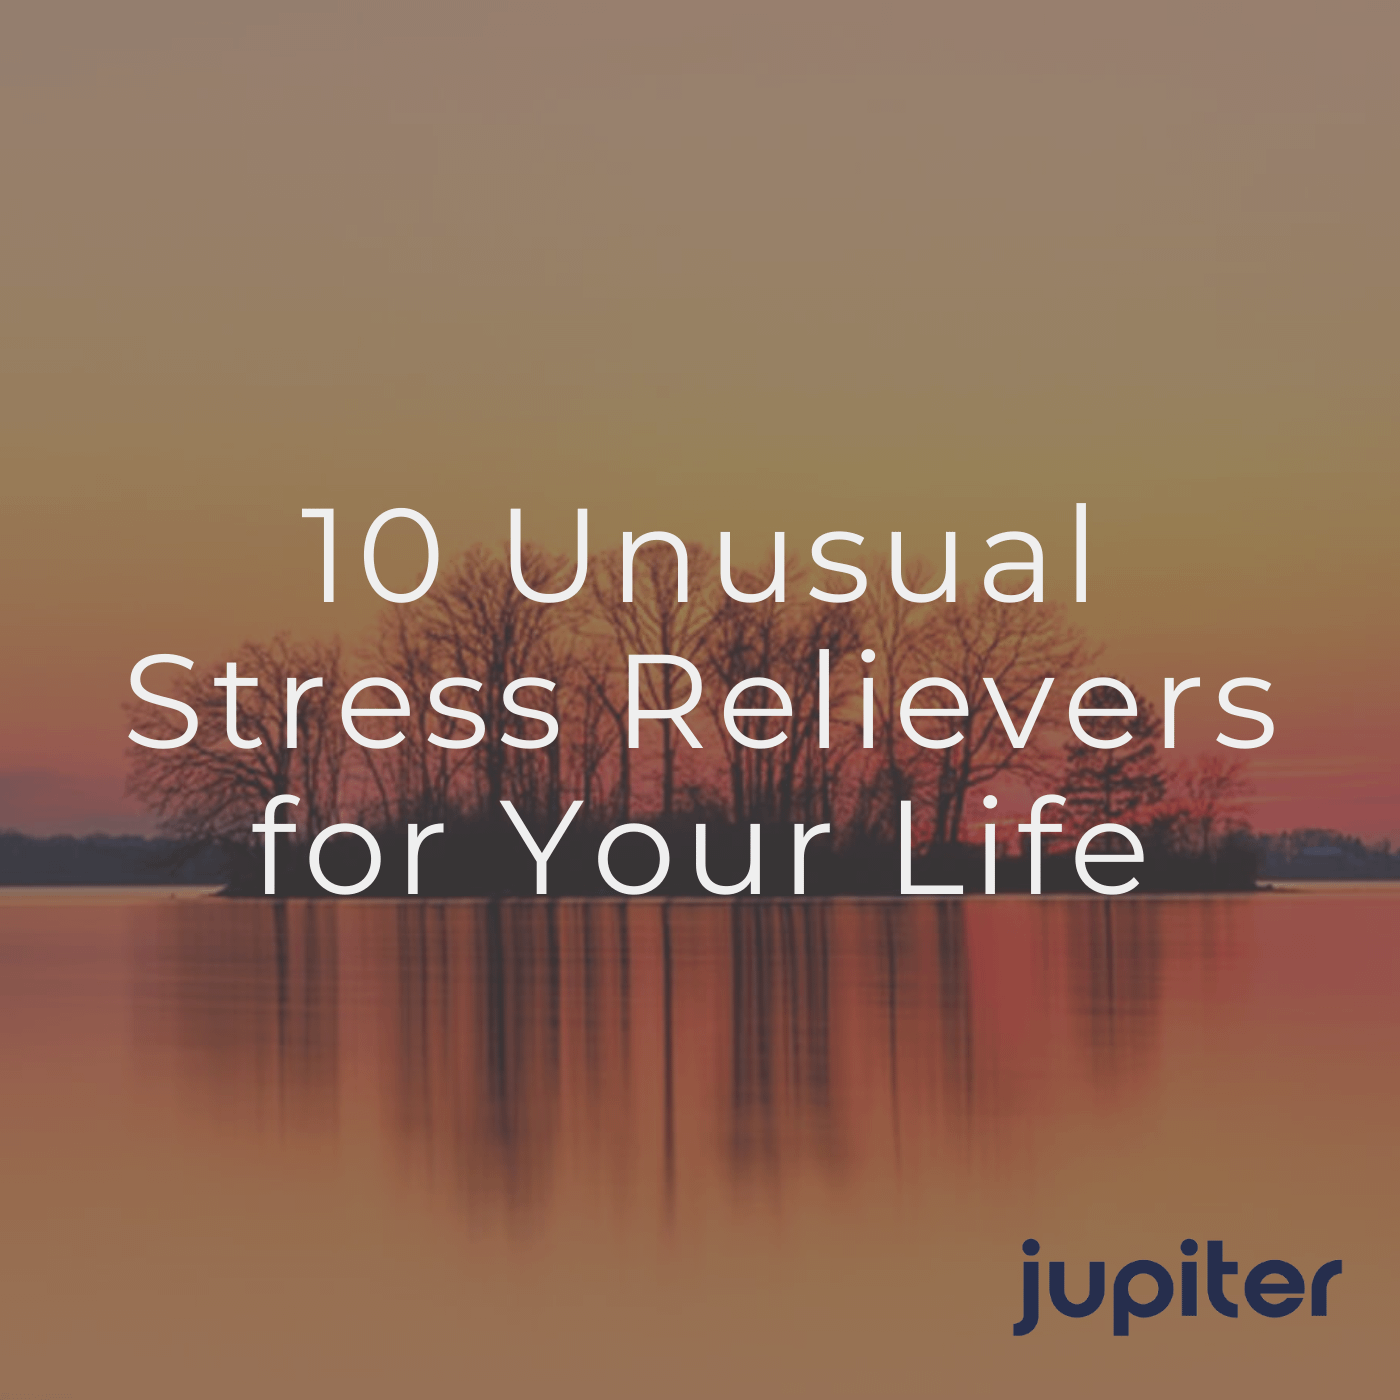 10 Unusual Stress Relievers for Your Life